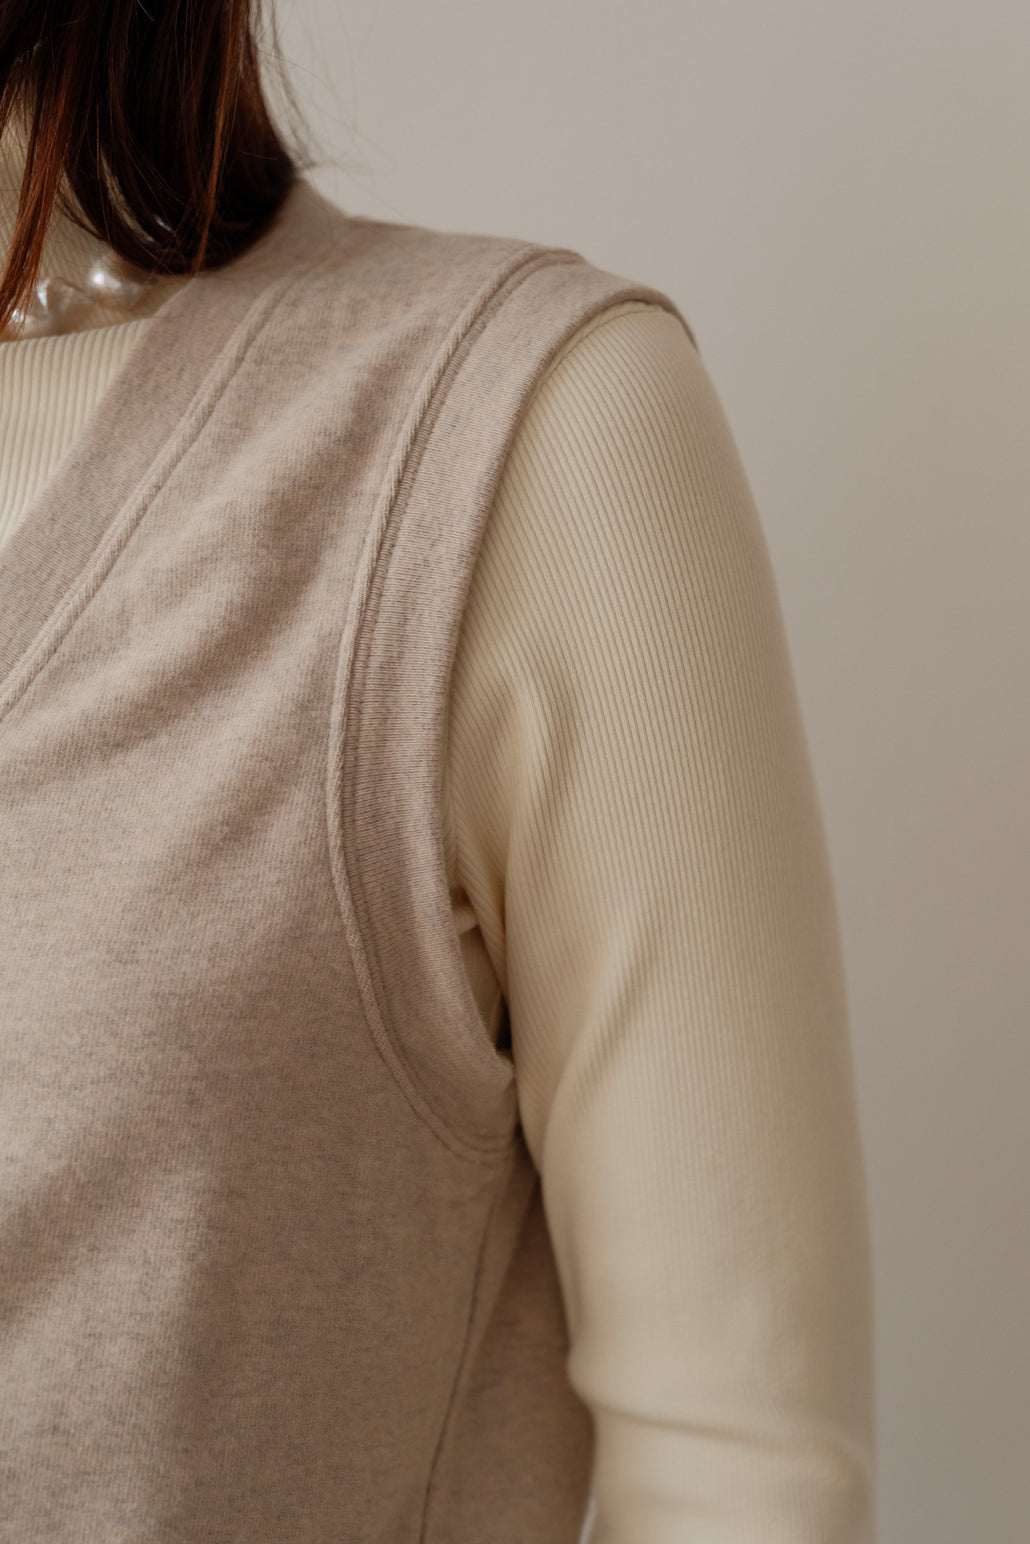 DONNI. Sweater Tube Top - Heather Oat